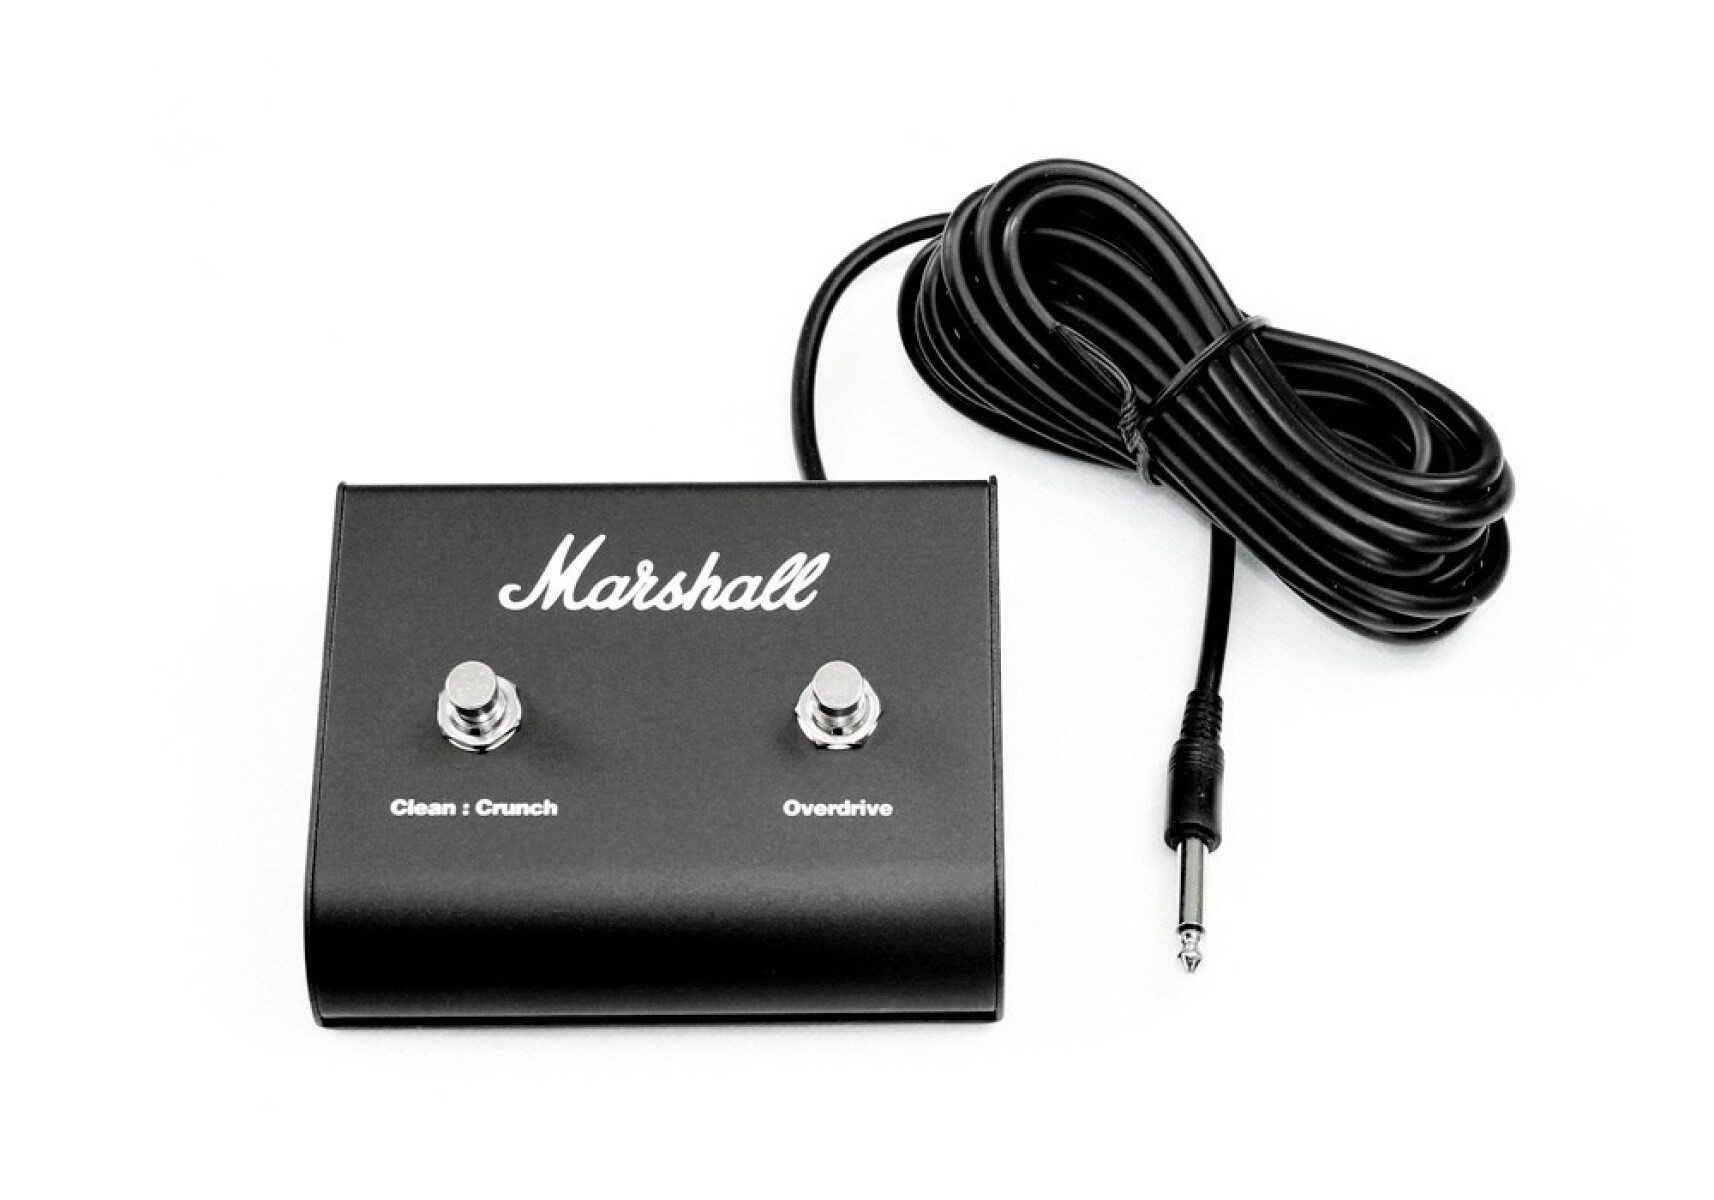 Pedal Footswitch Marshall Mg 